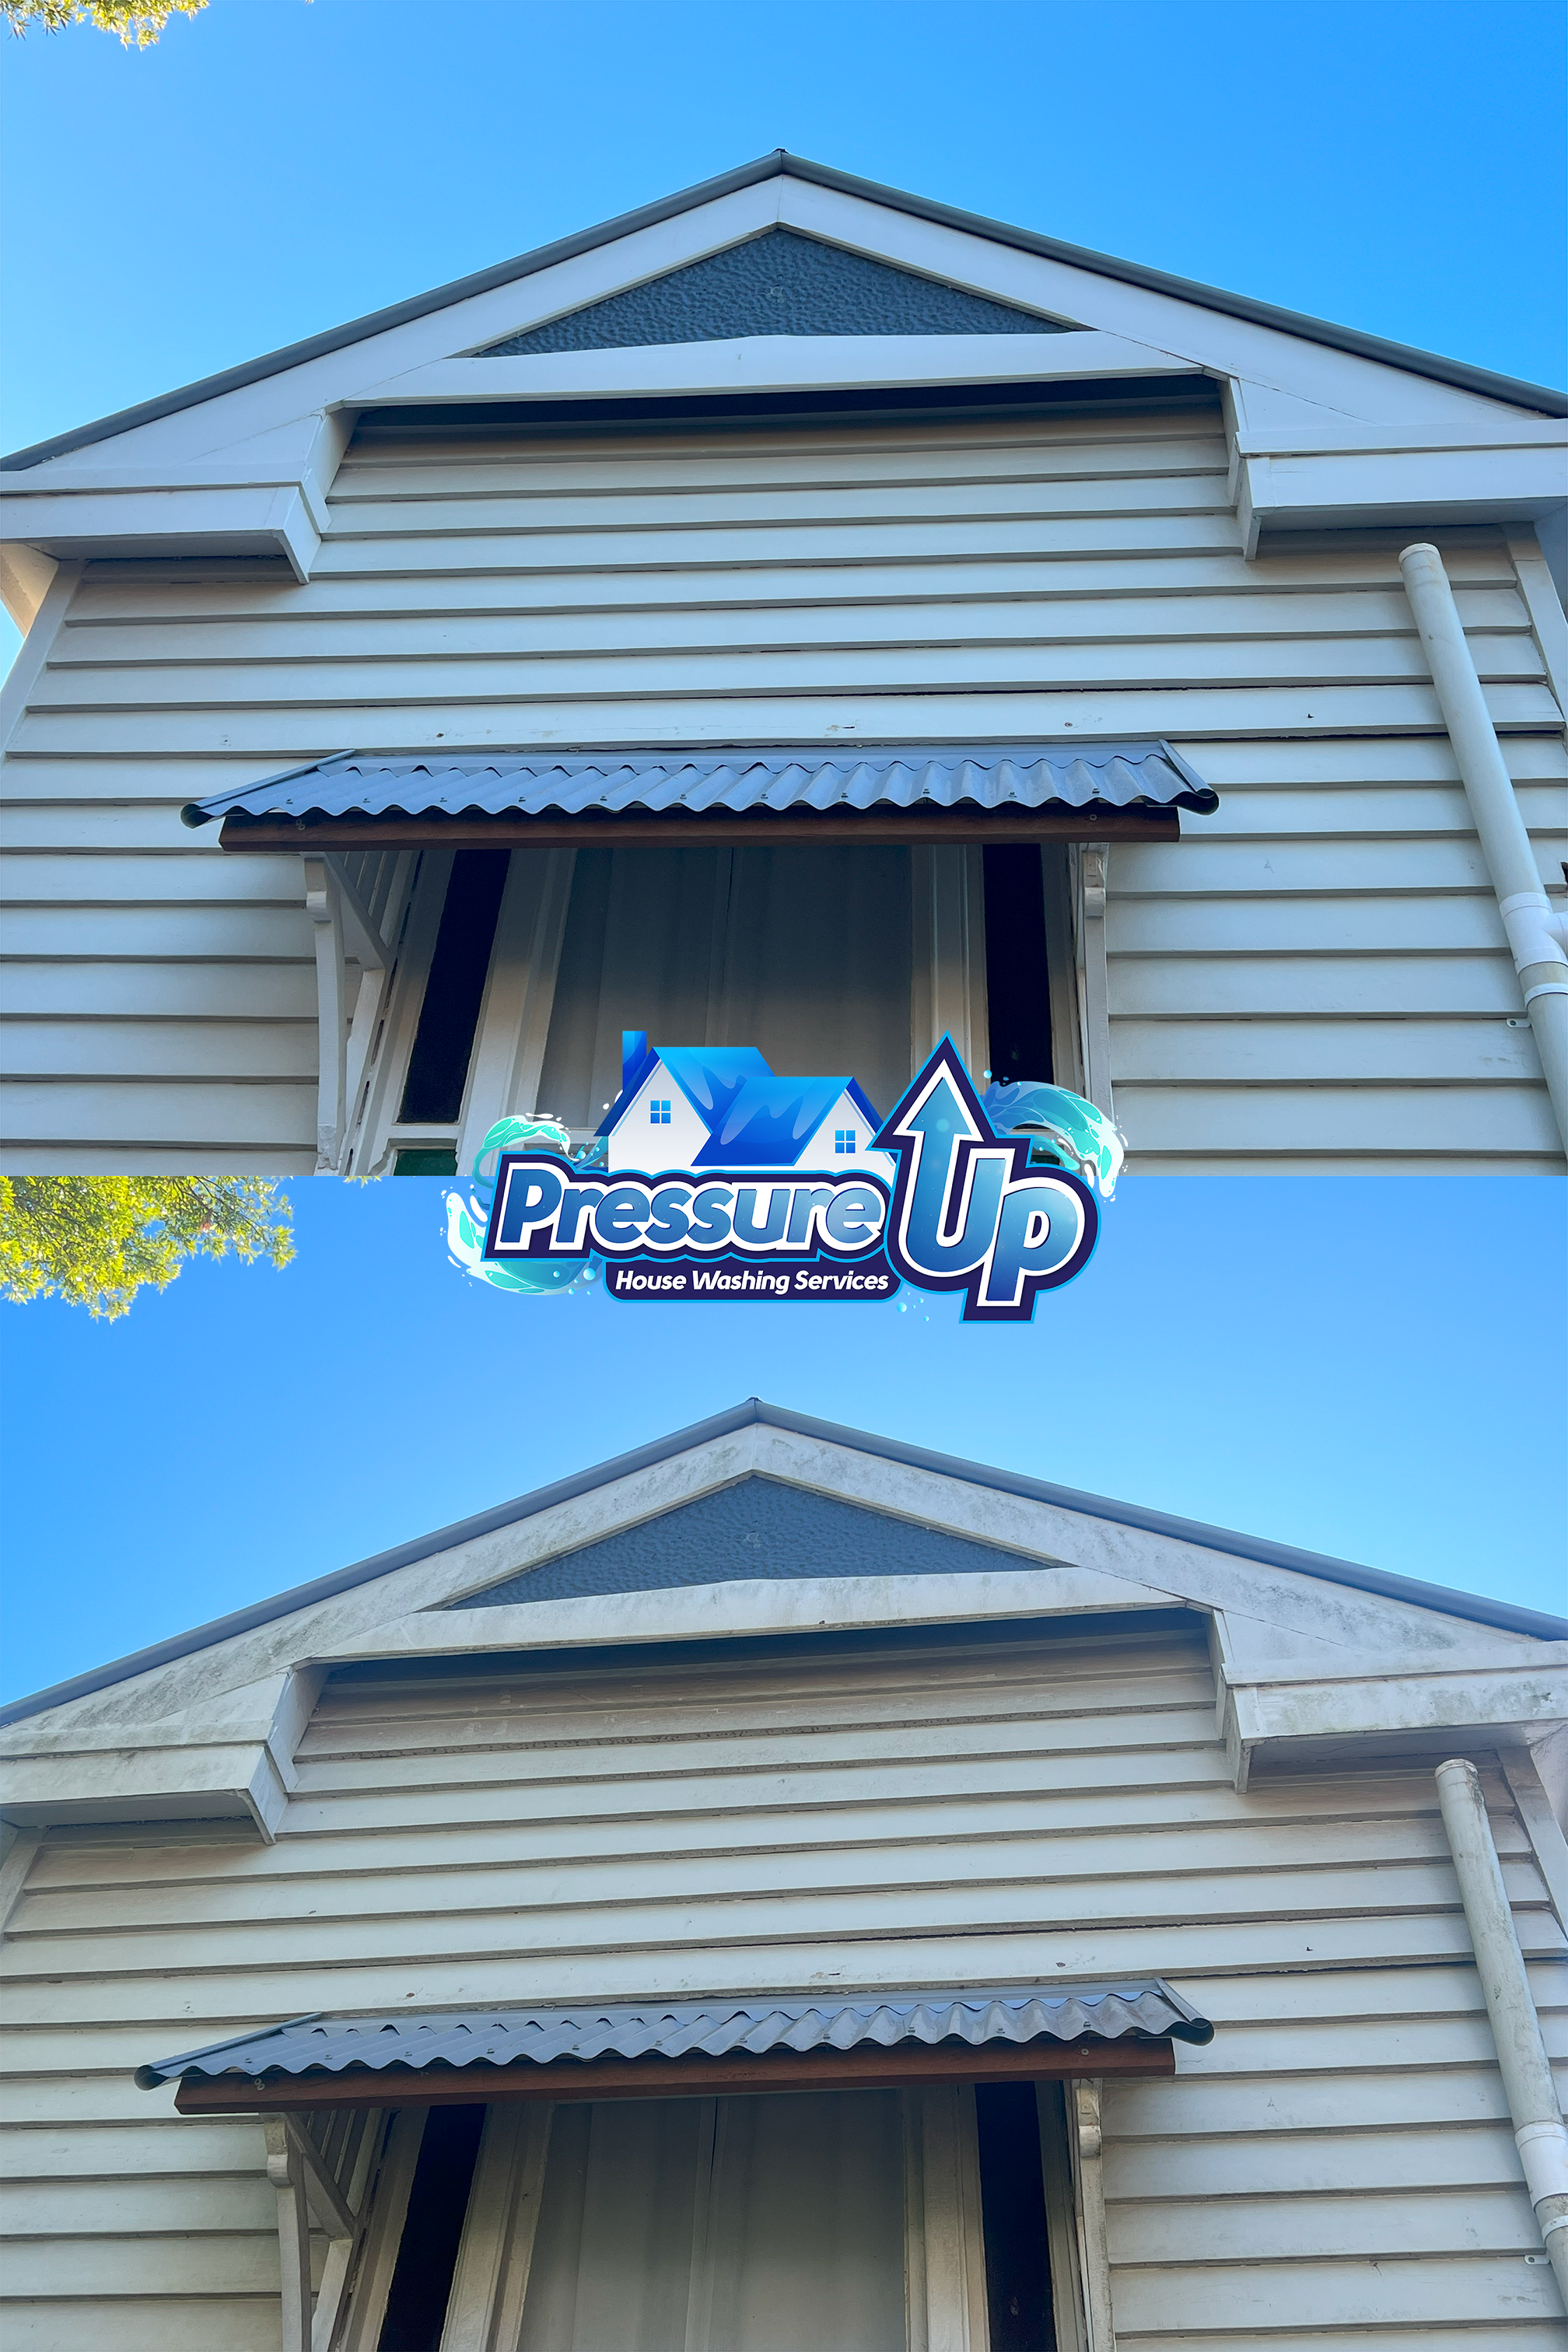 Amazing House Washing in South Toowoomba, Queensland